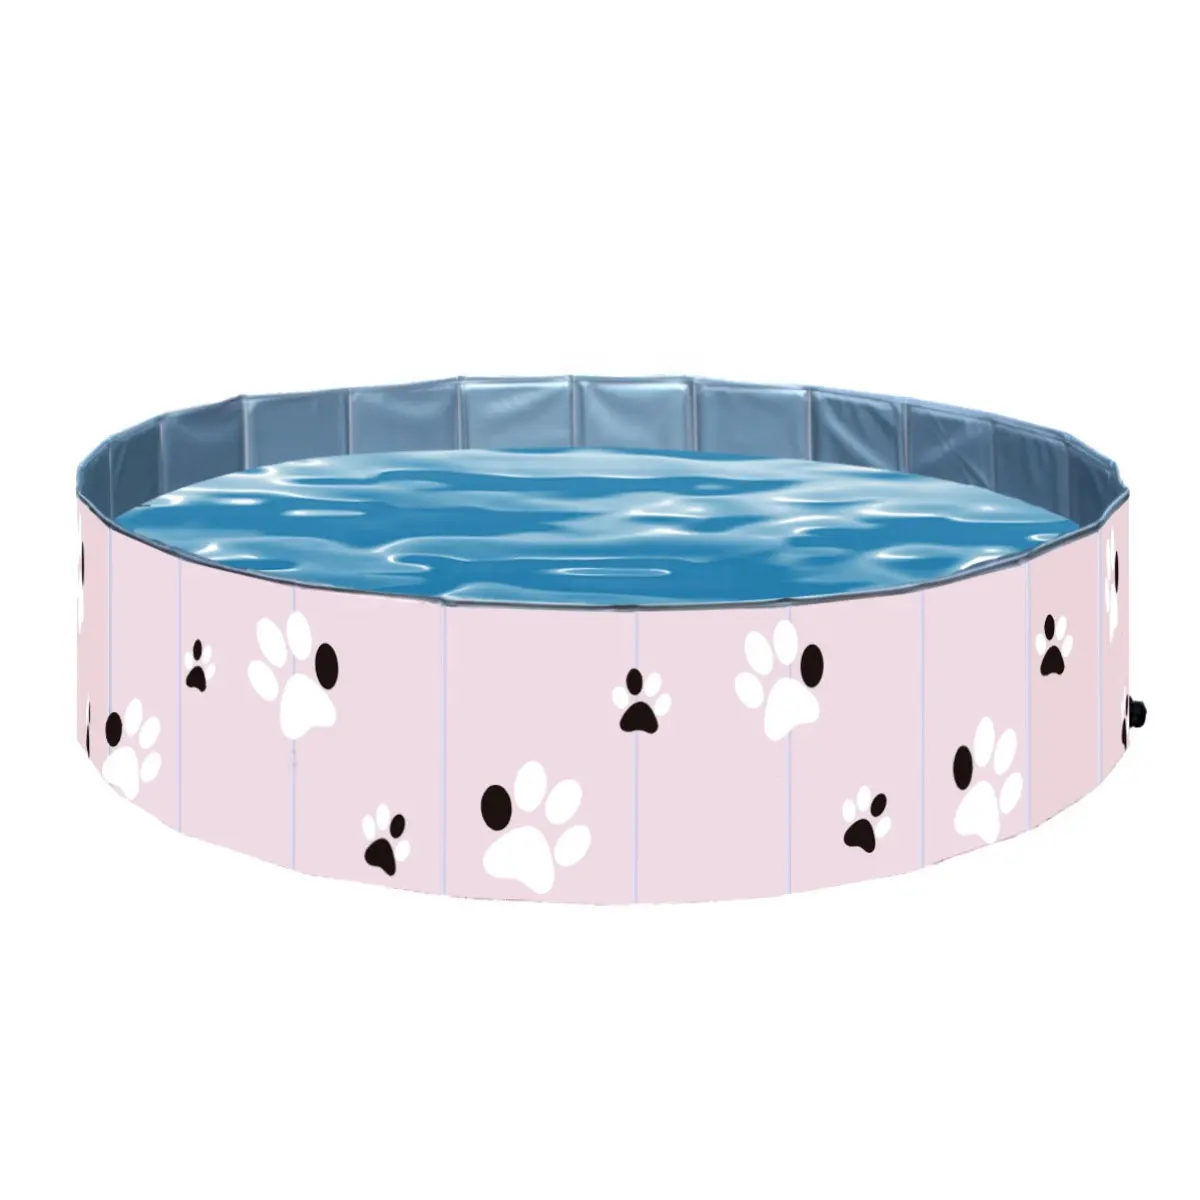 Professional Manufacture Promotion Price Foldable Pet Swimming Pool